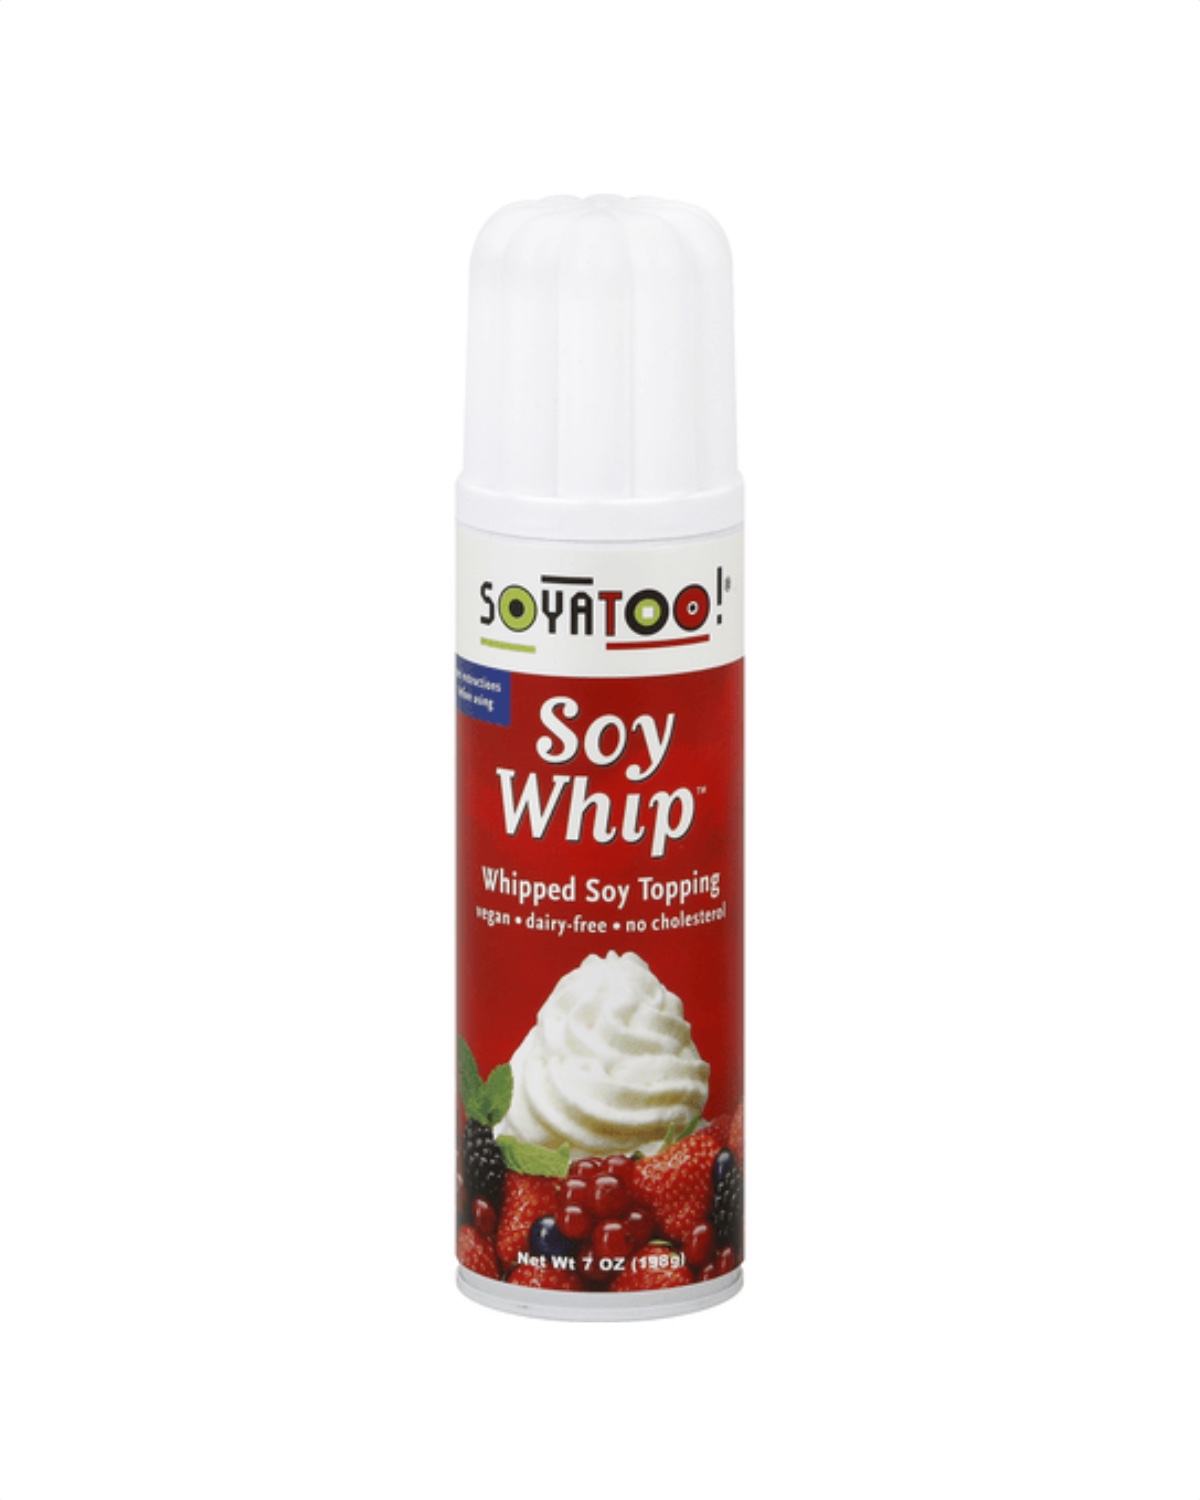 A red bottle of Soy Whip from the brand Soyatoo. 